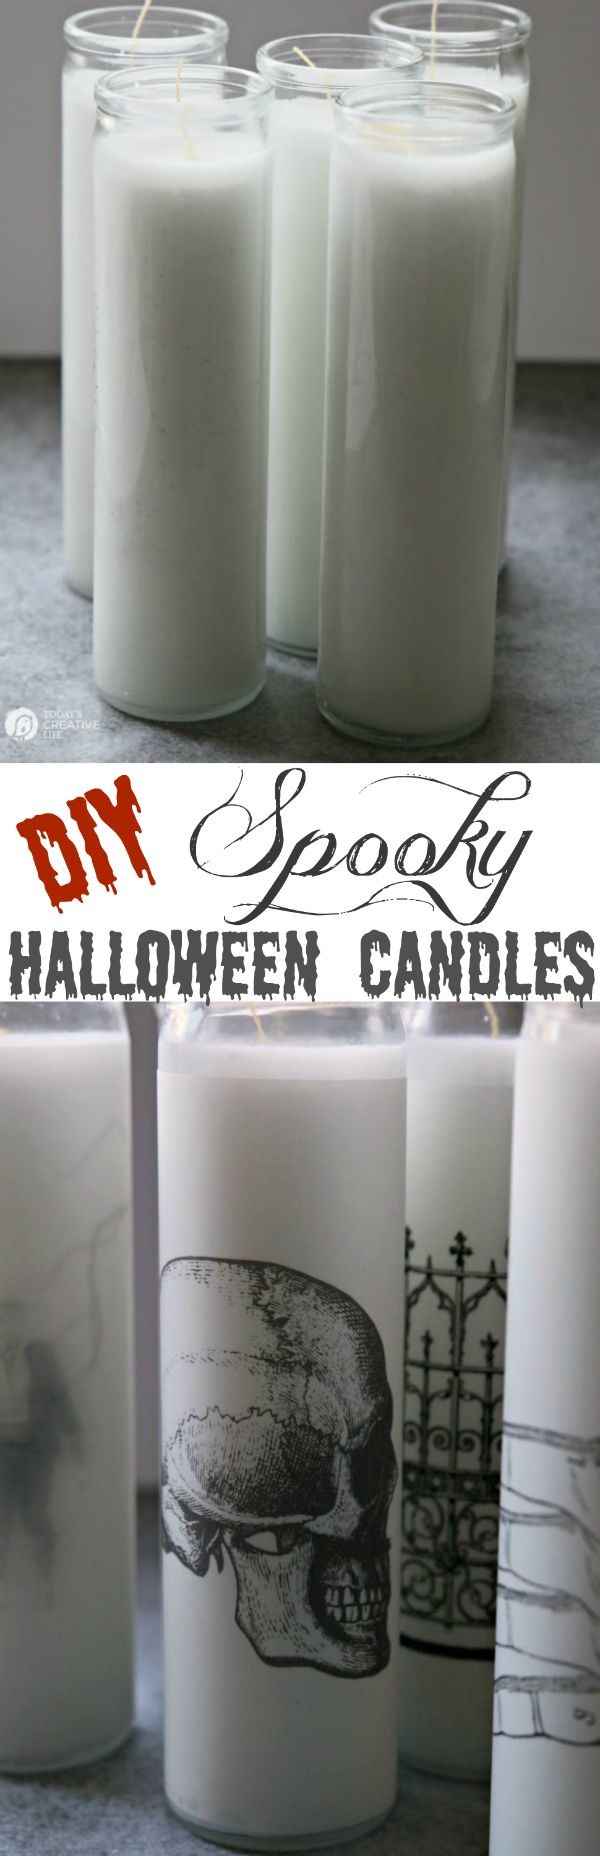 Photo Collage of Halloween Candles 